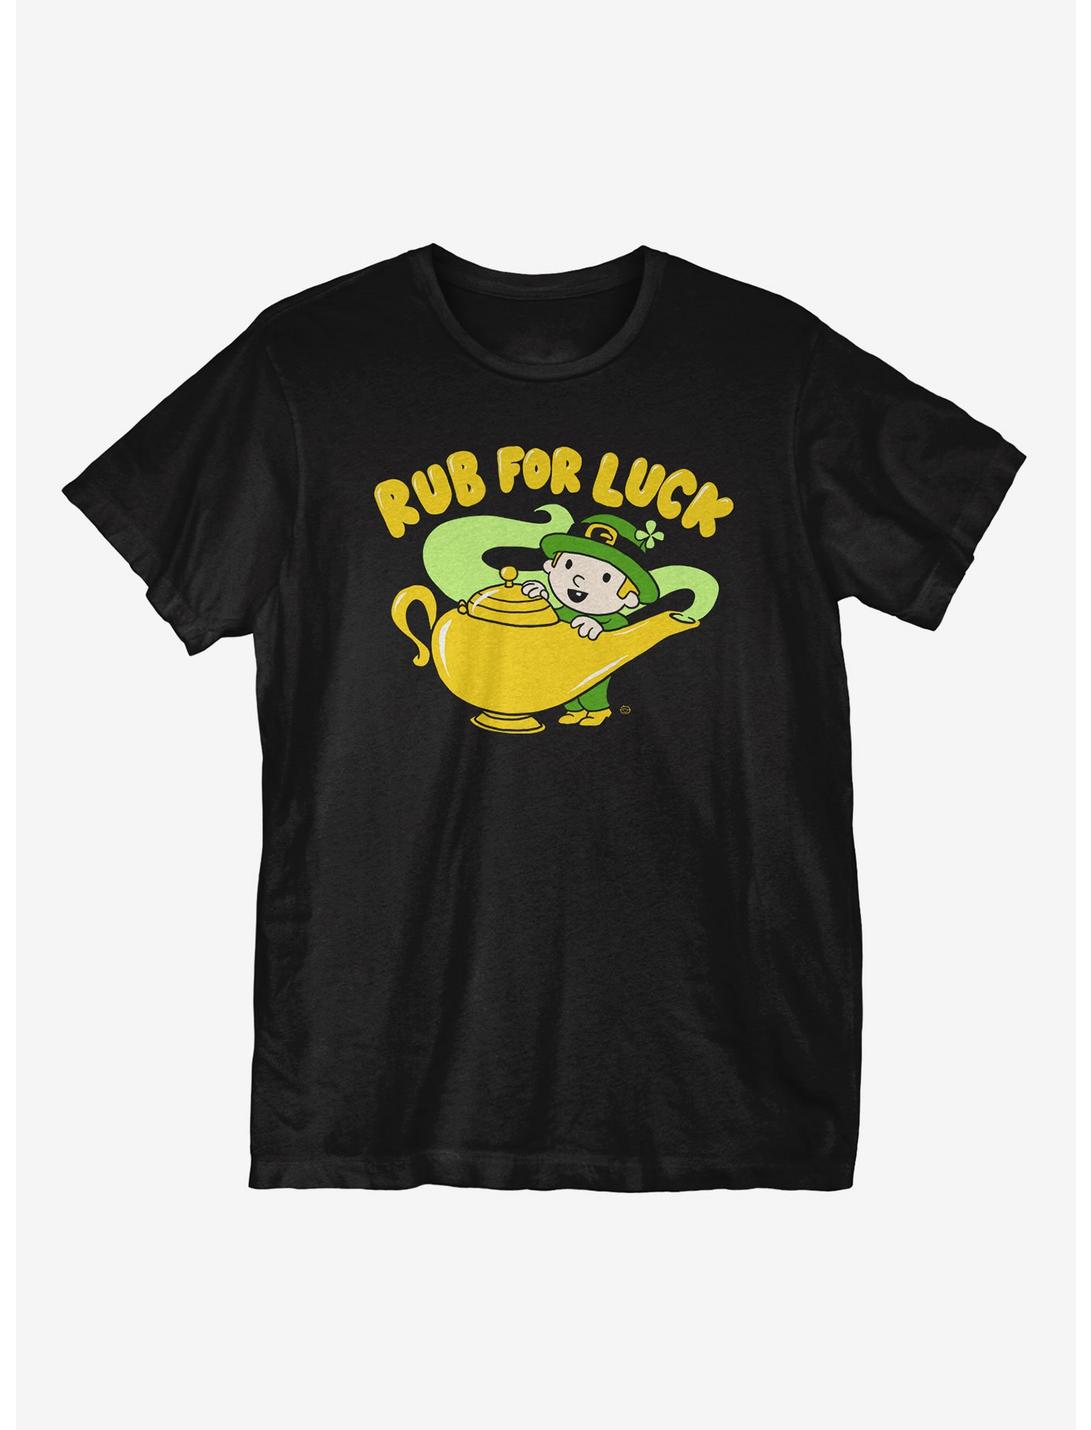 St. Patrick's Day Rub For Luck T-Shirt, BLACK, hi-res